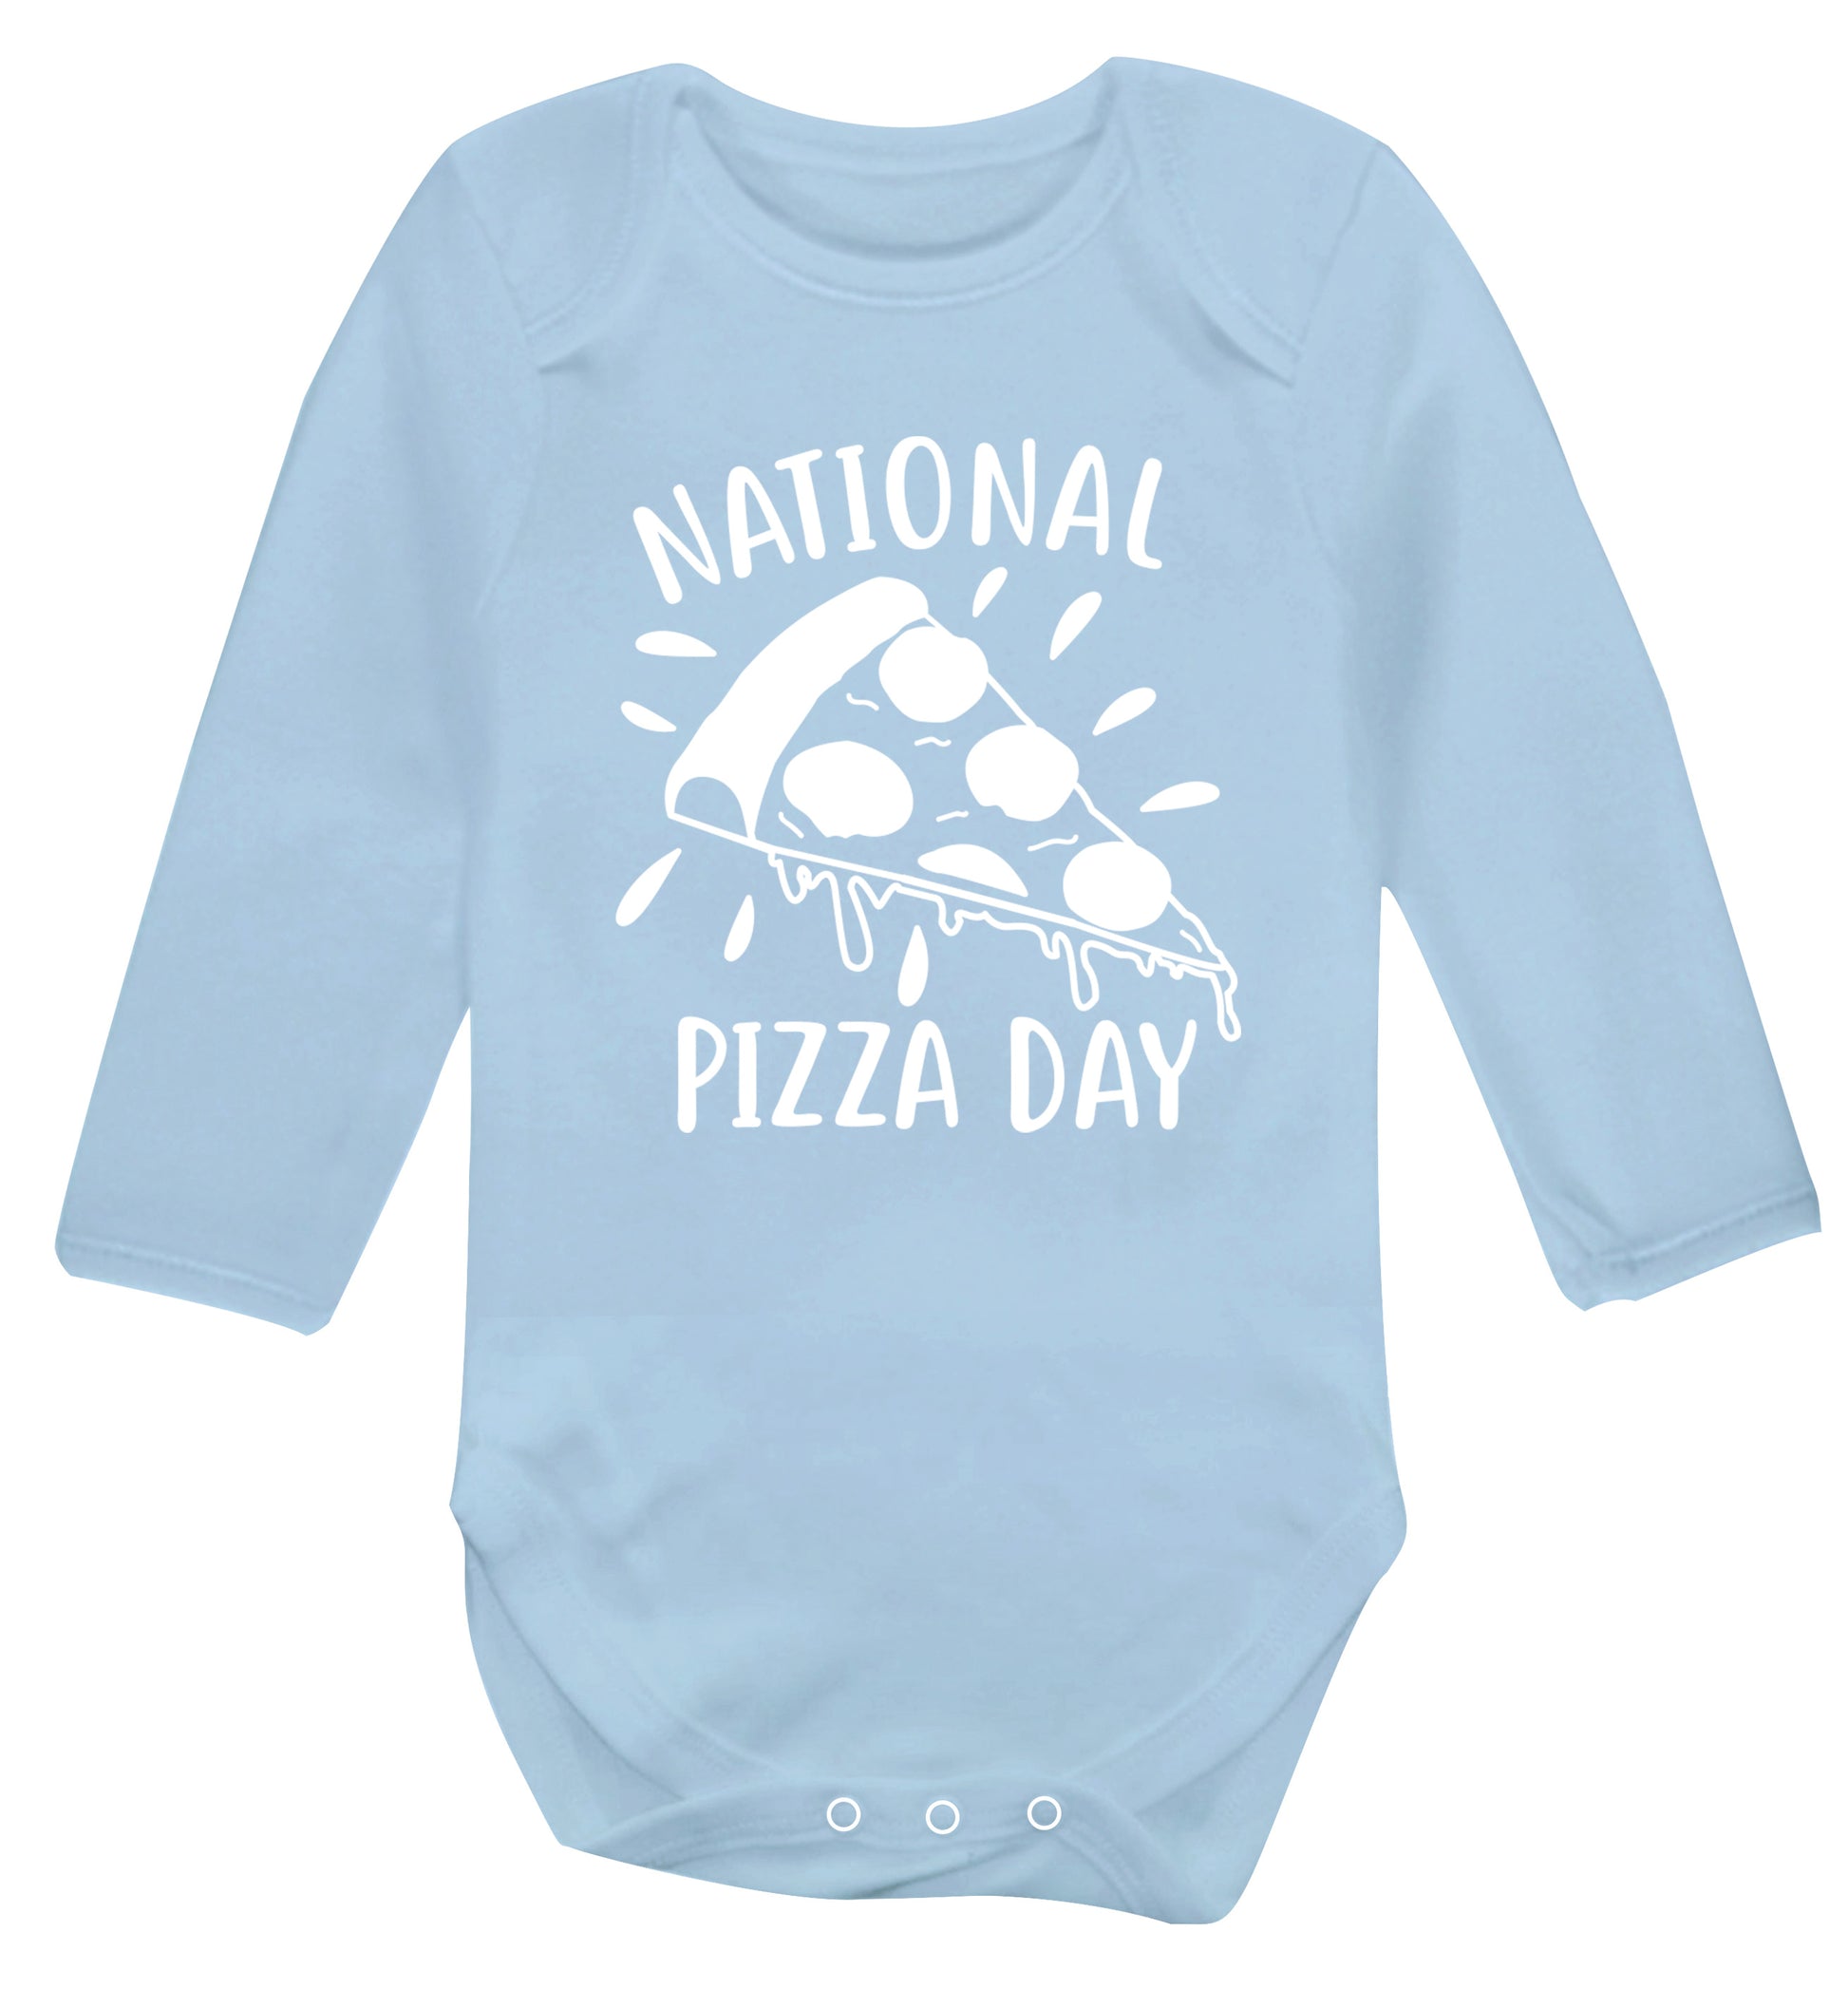 National pizza day Baby Vest long sleeved pale blue 6-12 months